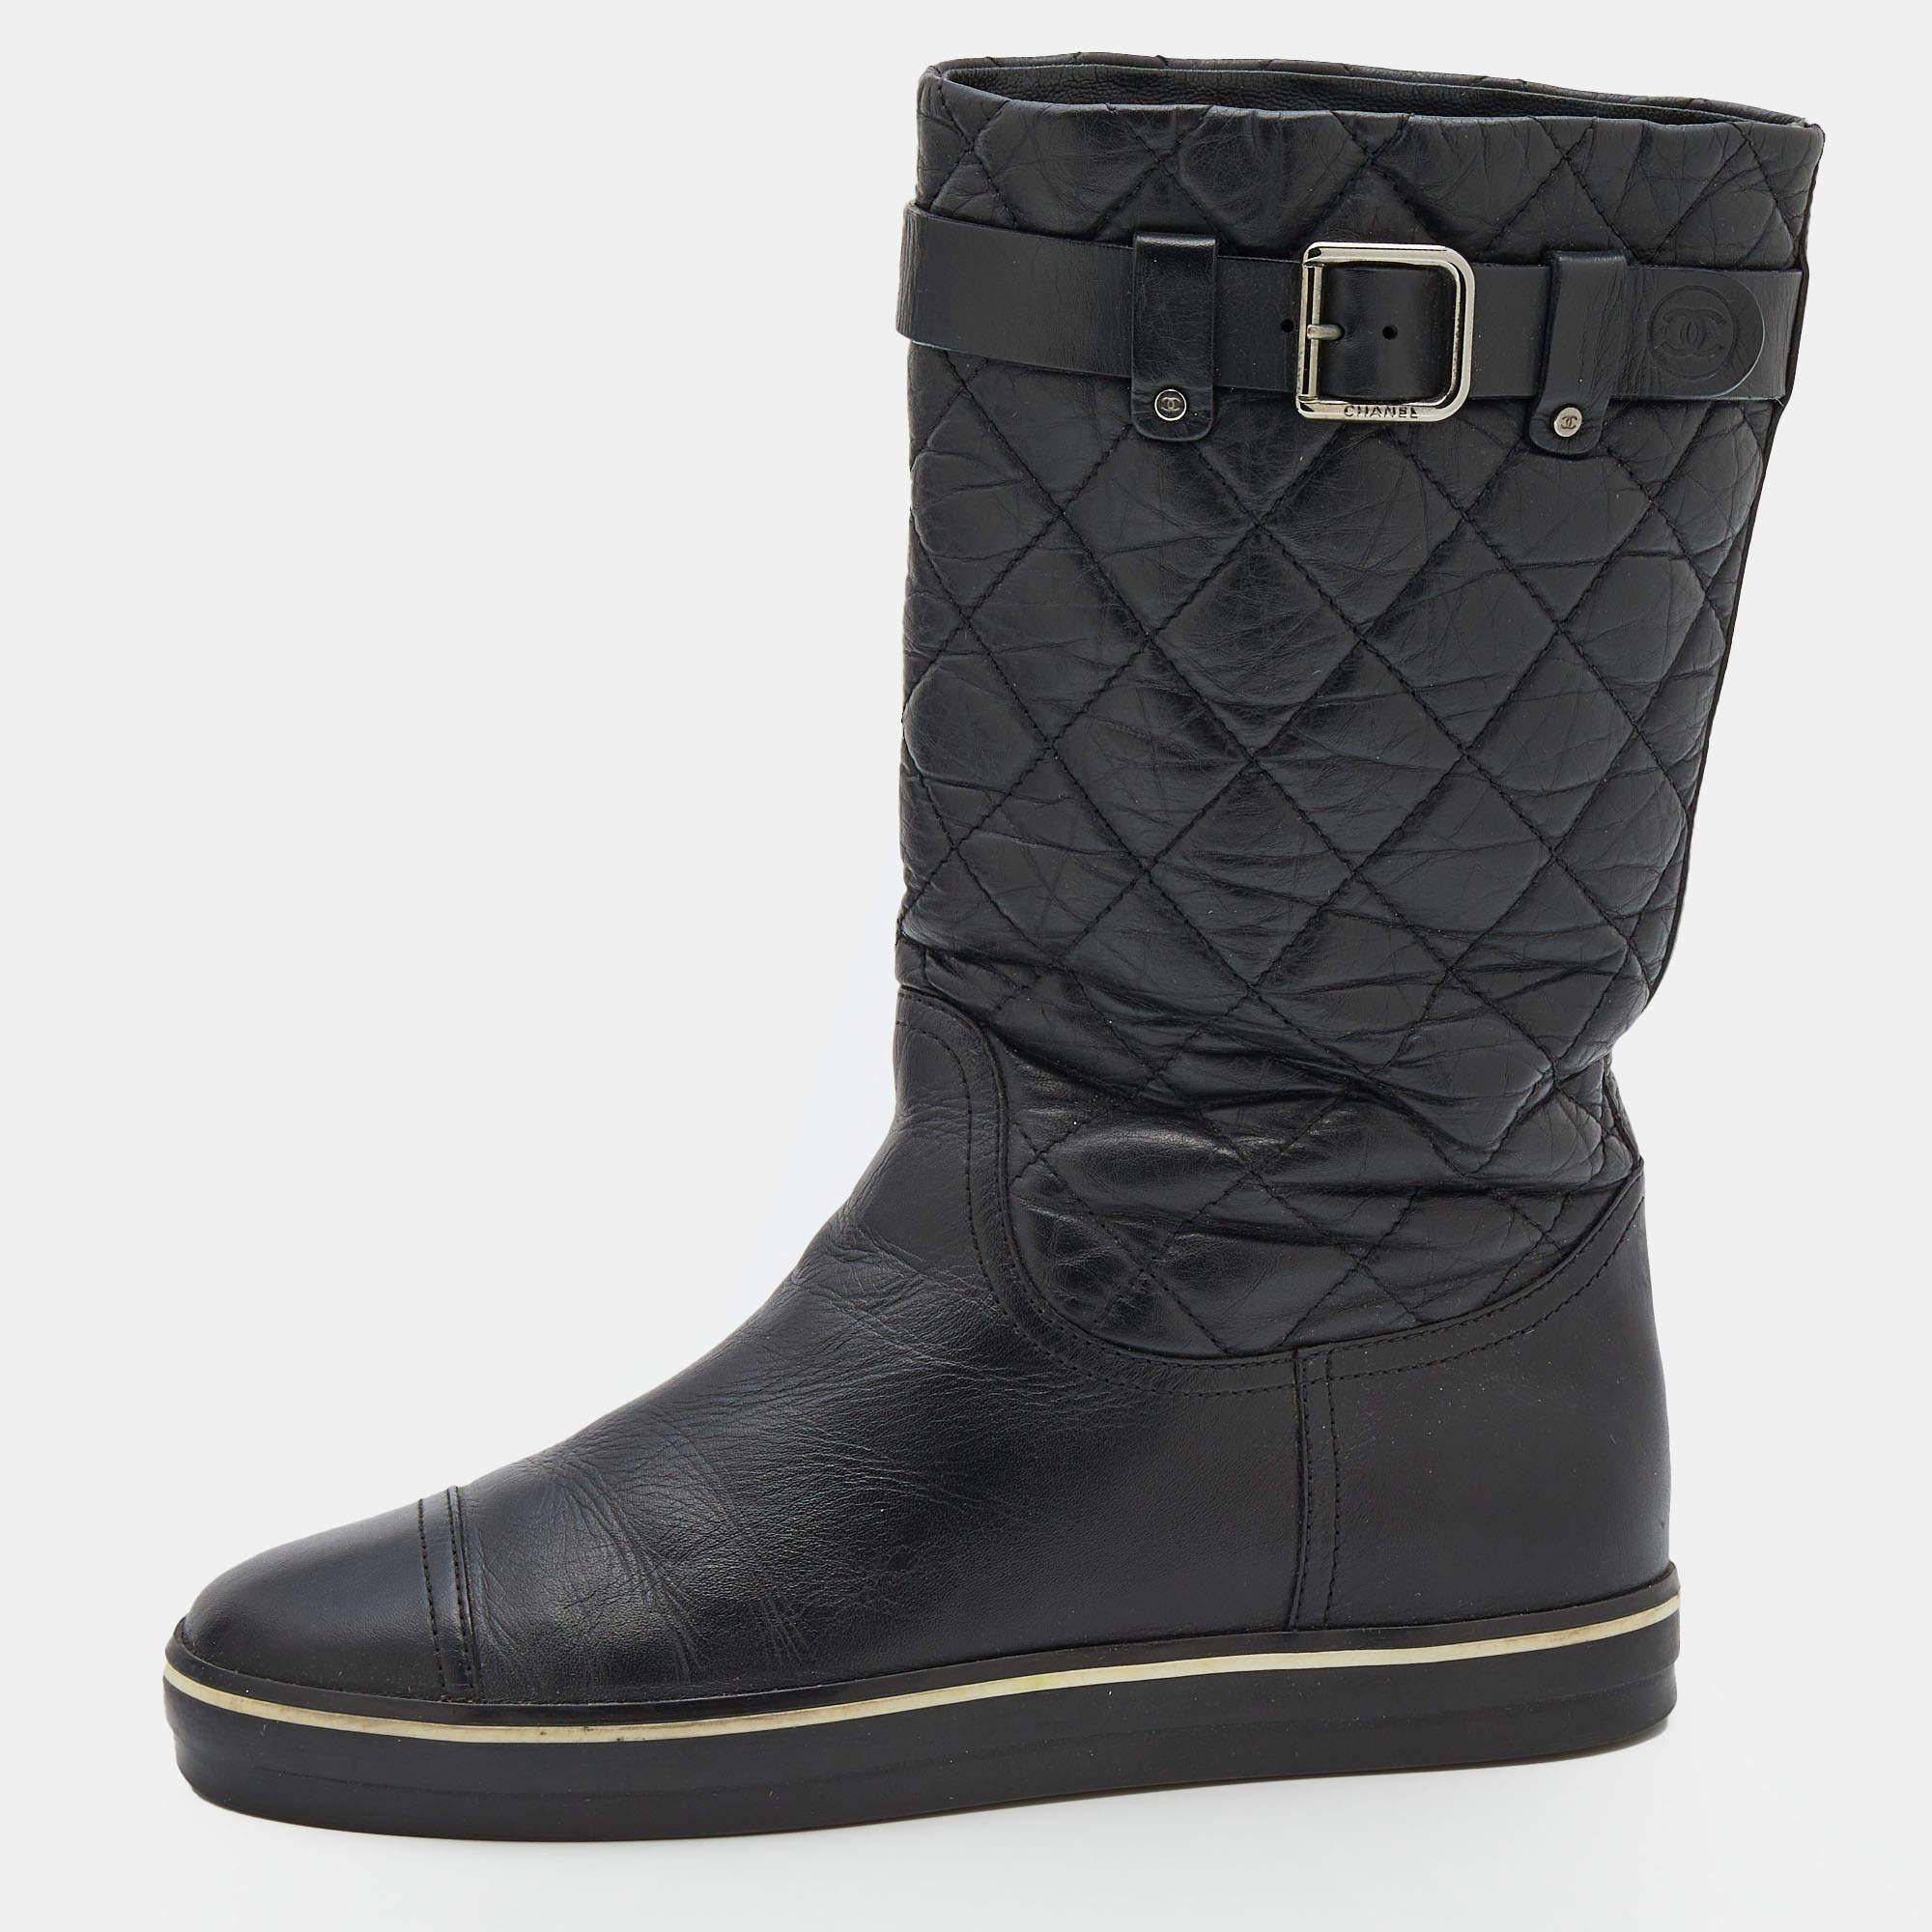 Chanel Black Quilted Leather Mid Calf Length Boots Size 37.5 2